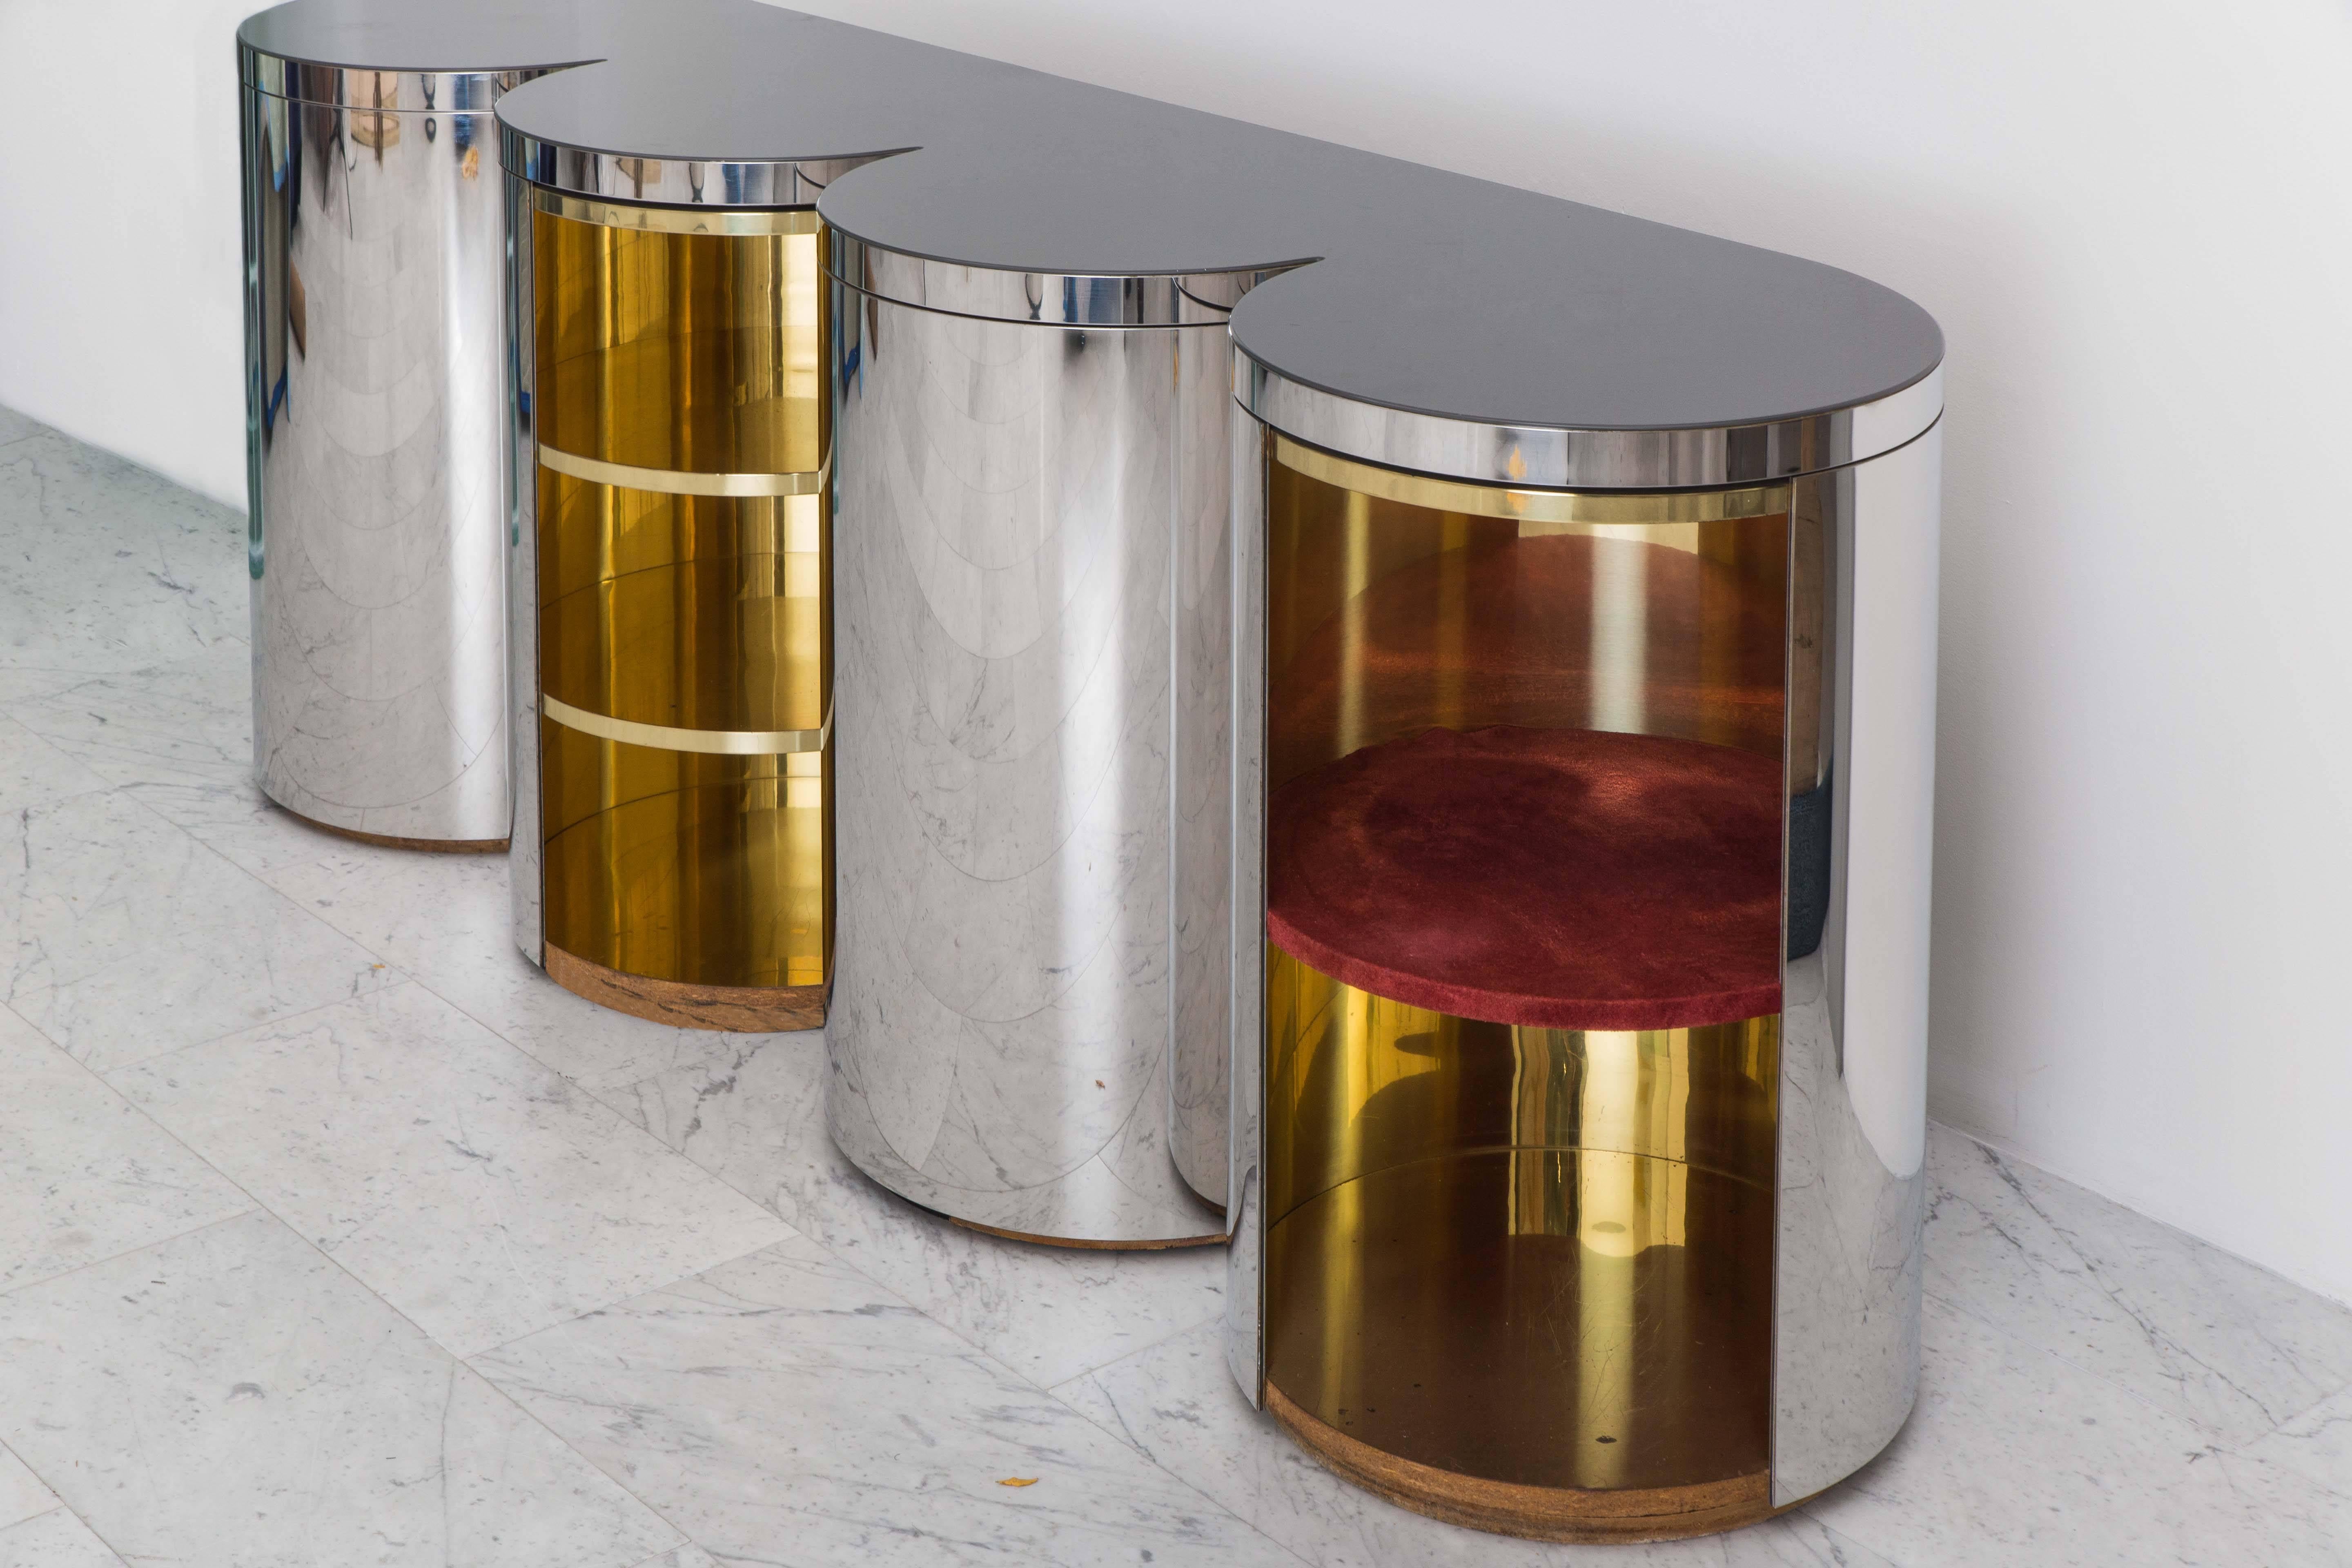 A mirror polished steel cylindrical credenza designed in 1981 by Paul Evans for the Paul Evans Showroom in New York, the credenza features a unique design with ample storage space. Made with plexiglass, wood, and laminated interiors, the cylindrical